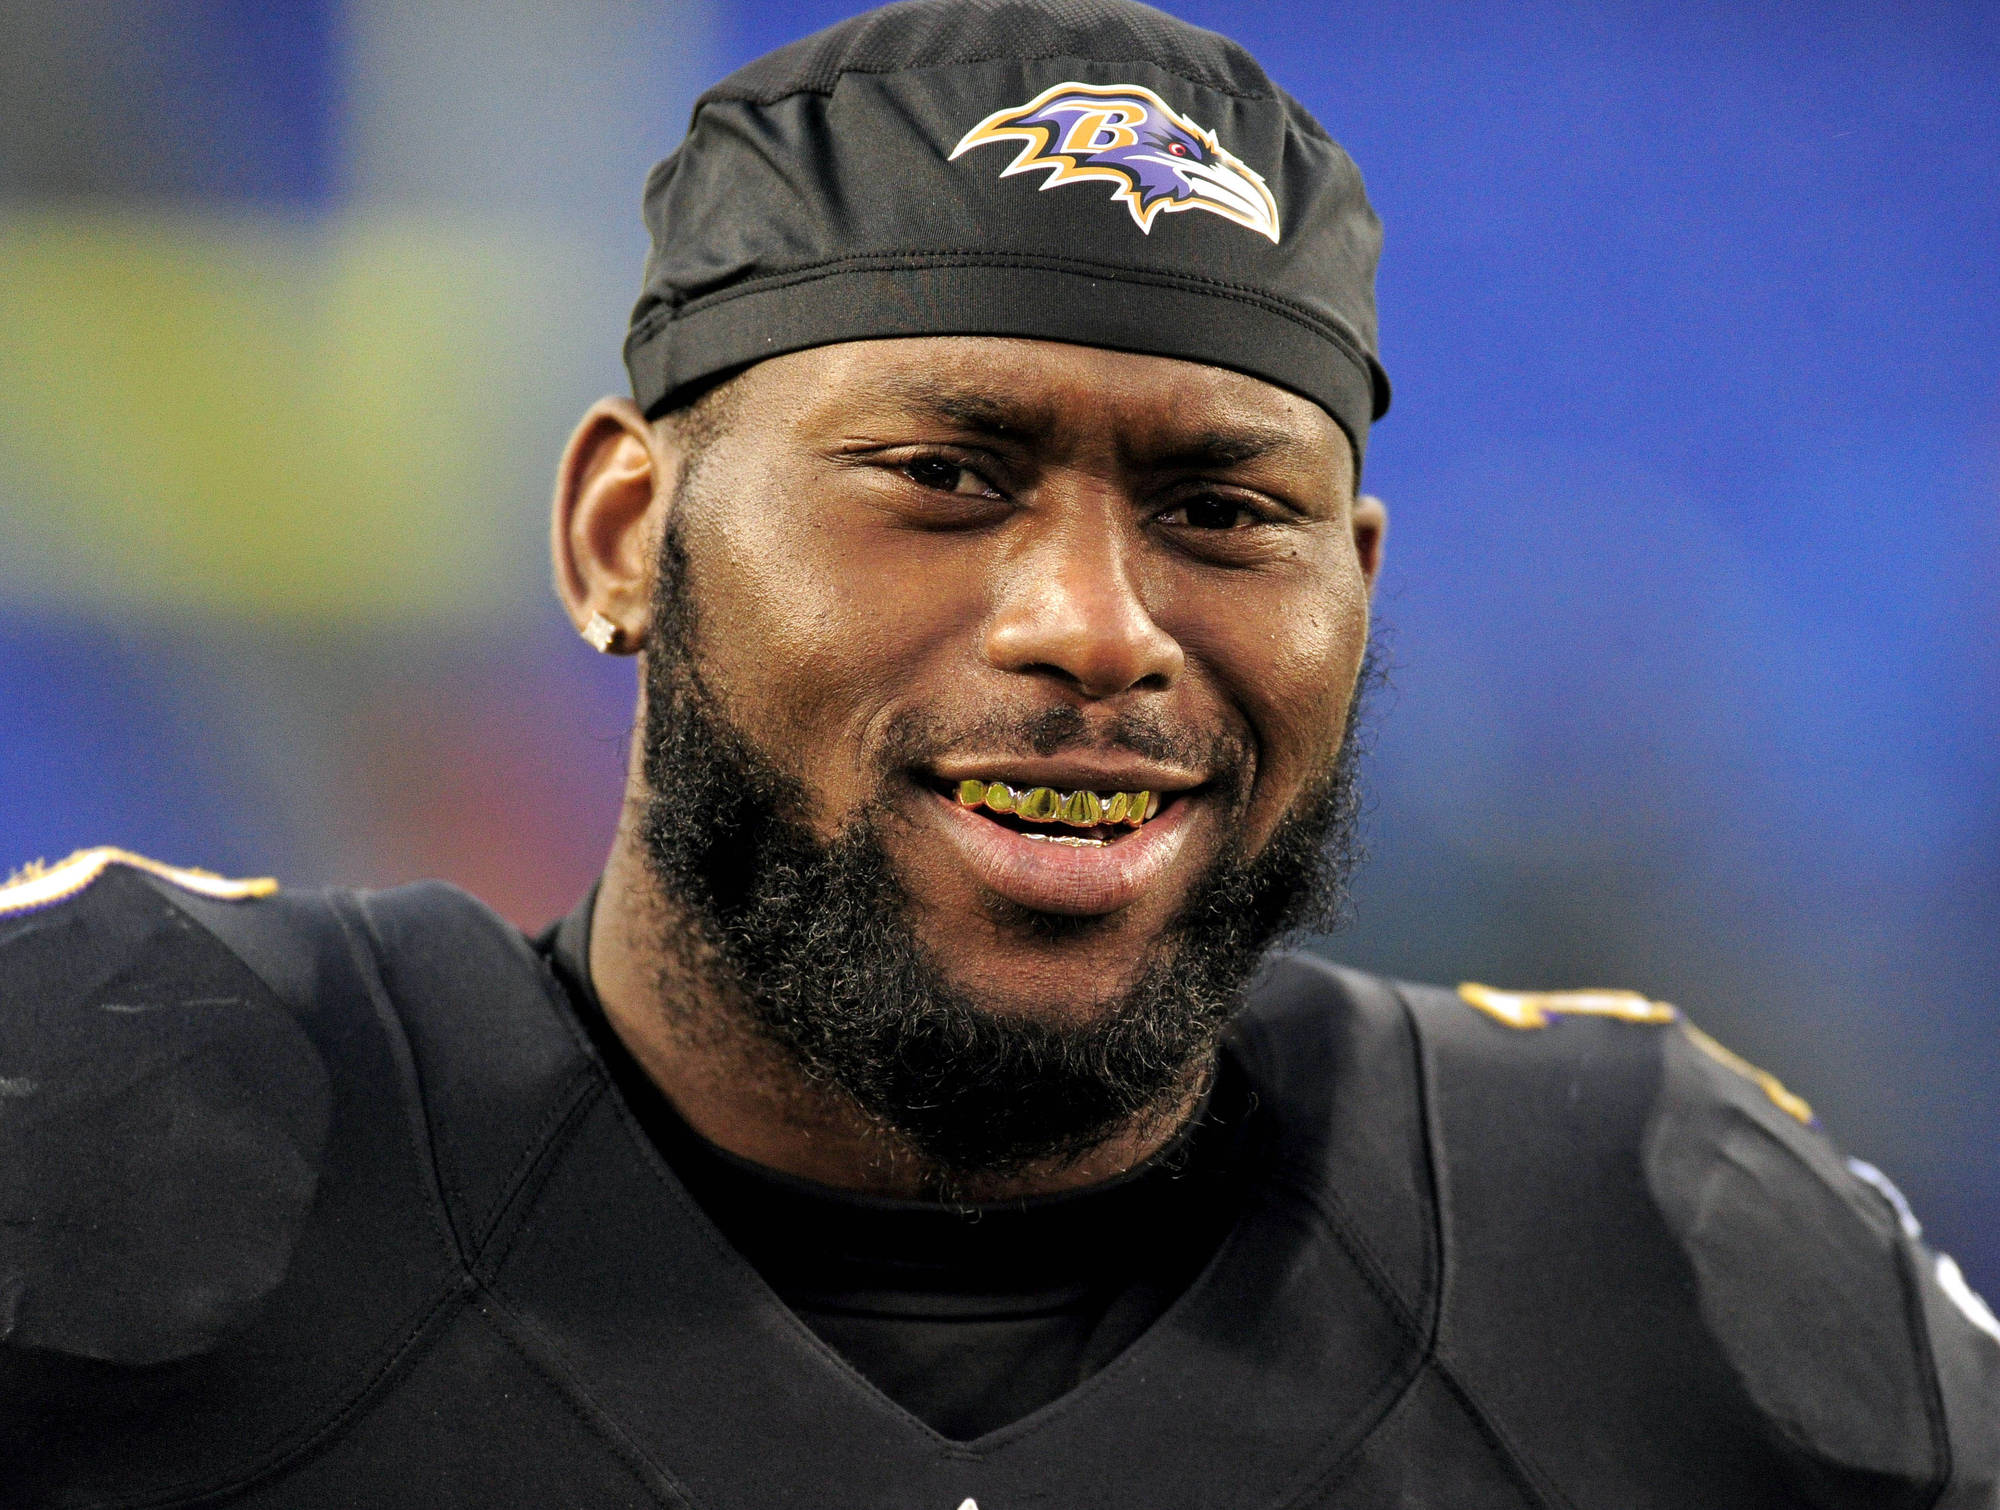 Former Ravens safety Matt Elam arrested in Miami, faces felony drug charges